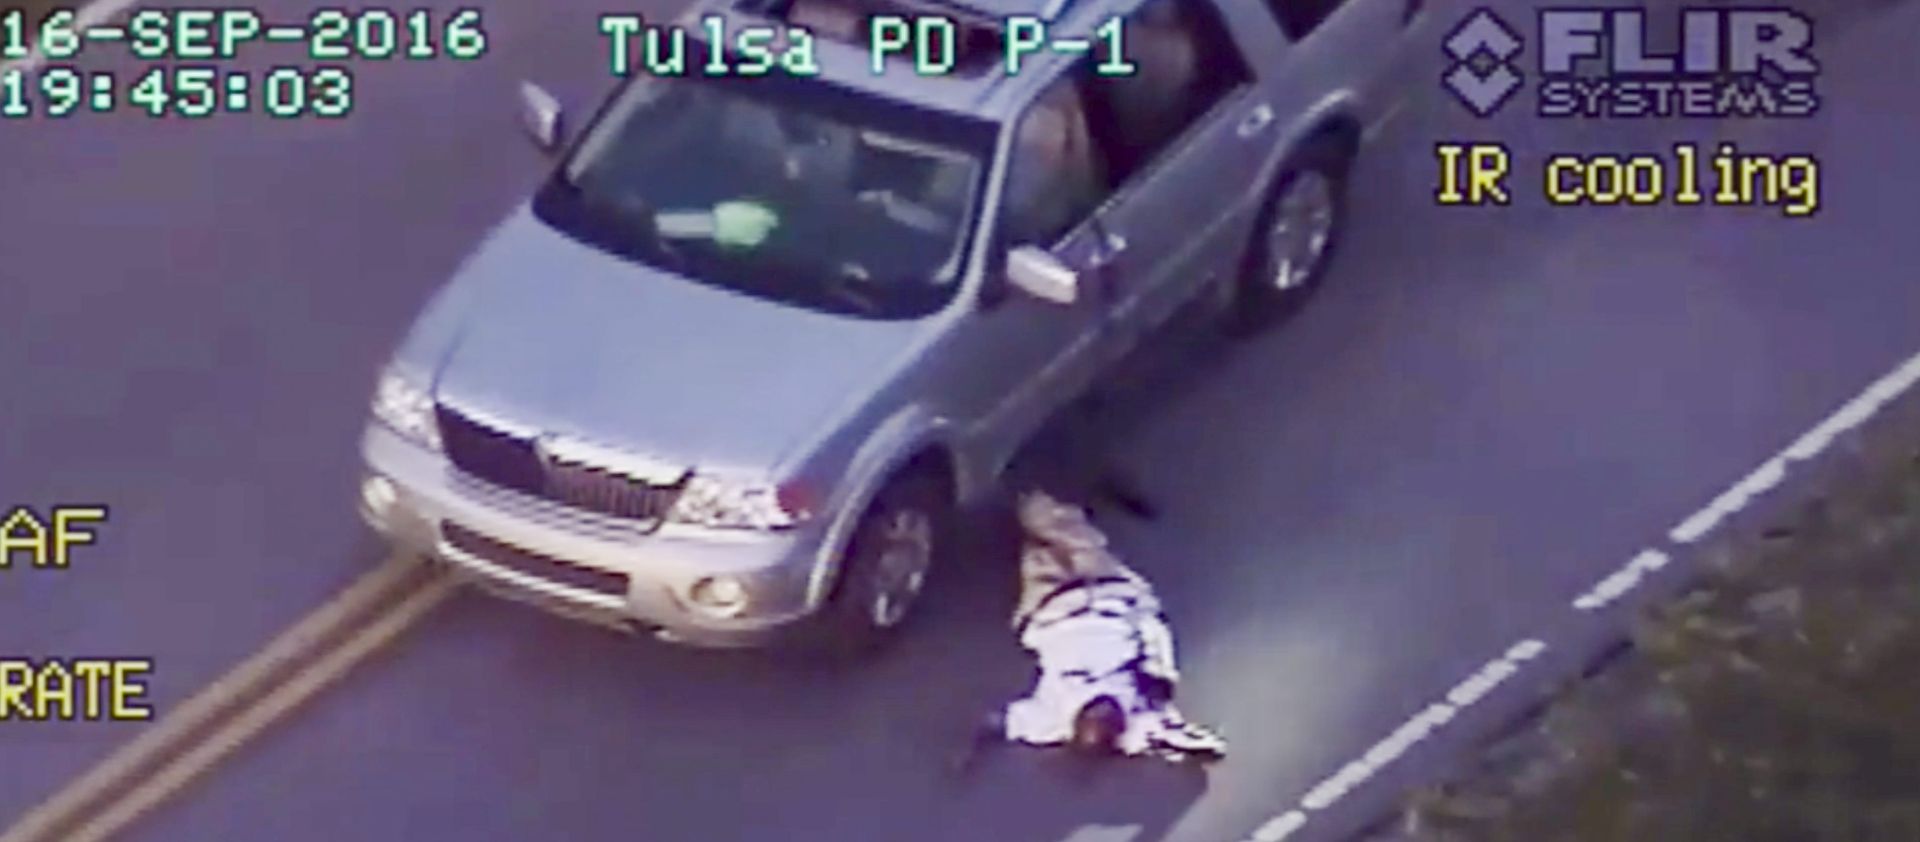 epa05549236 A frame grab from video released by the Tulsa, Oklahoma, USA, Police Department and acquired on 20 September 2016 reportedly shows Terrence Crutcher (R) lying on the ground as he is tasered and shot by police after his automobile broke down in Tulsa, Oklahoma, USA, on 16 September 2016. Crutcher died after being taken to a hospital later that night. No weapon was found either on Crutcher or in his vehicle.  EPA/TULSA POLICE DEPARTMENT / HANDOUT  HANDOUT EDITORIAL USE ONLY/NO SALES